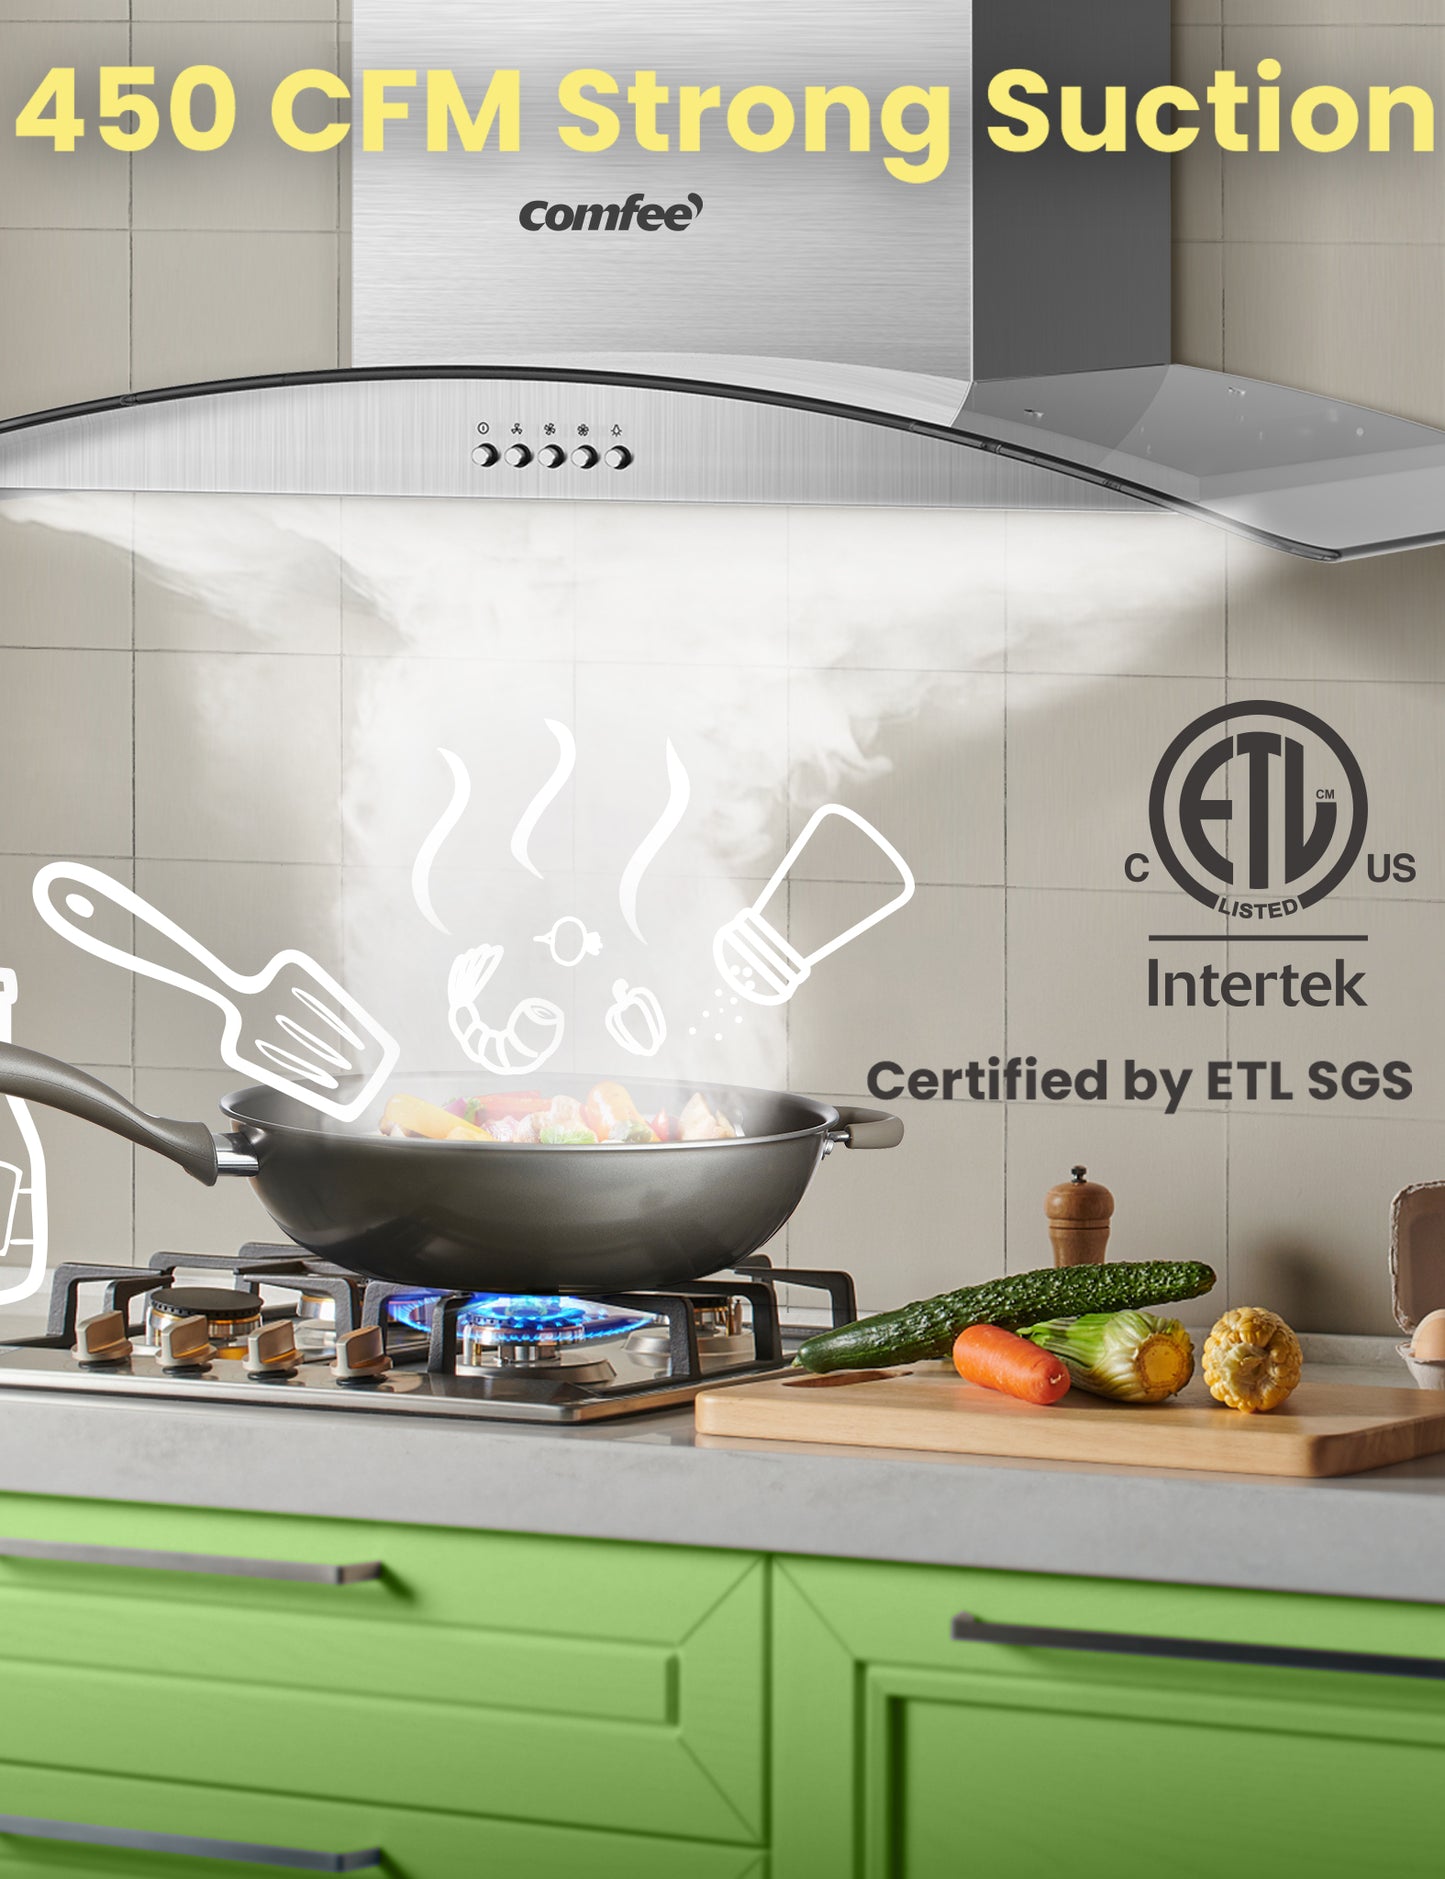 wall mounted range hood sucking steam from a cooking pot